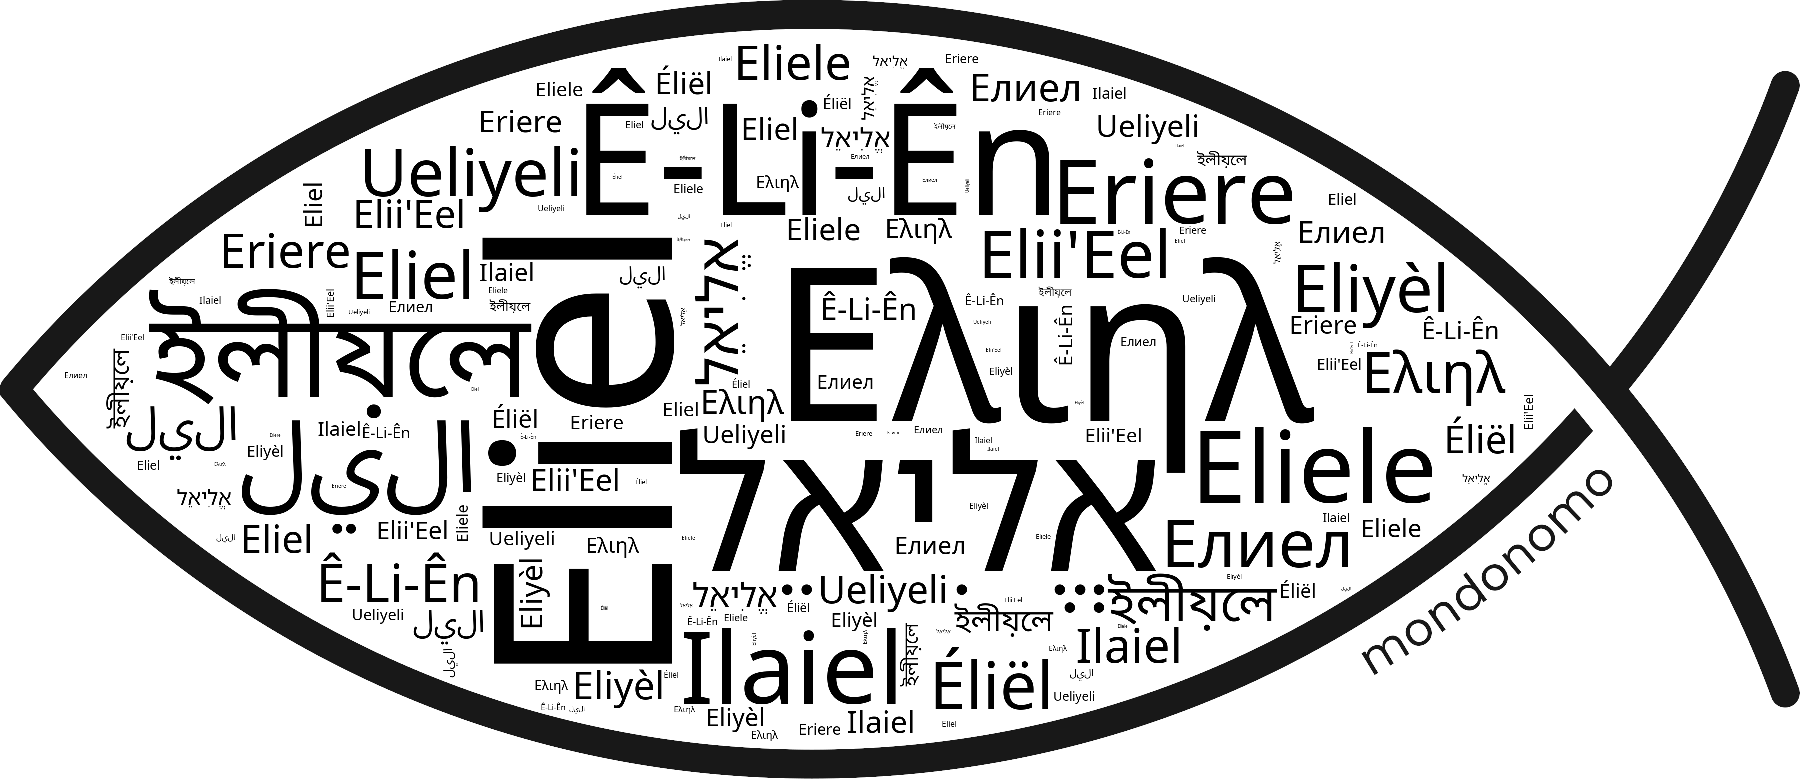 Name Eliel in the world's Bibles